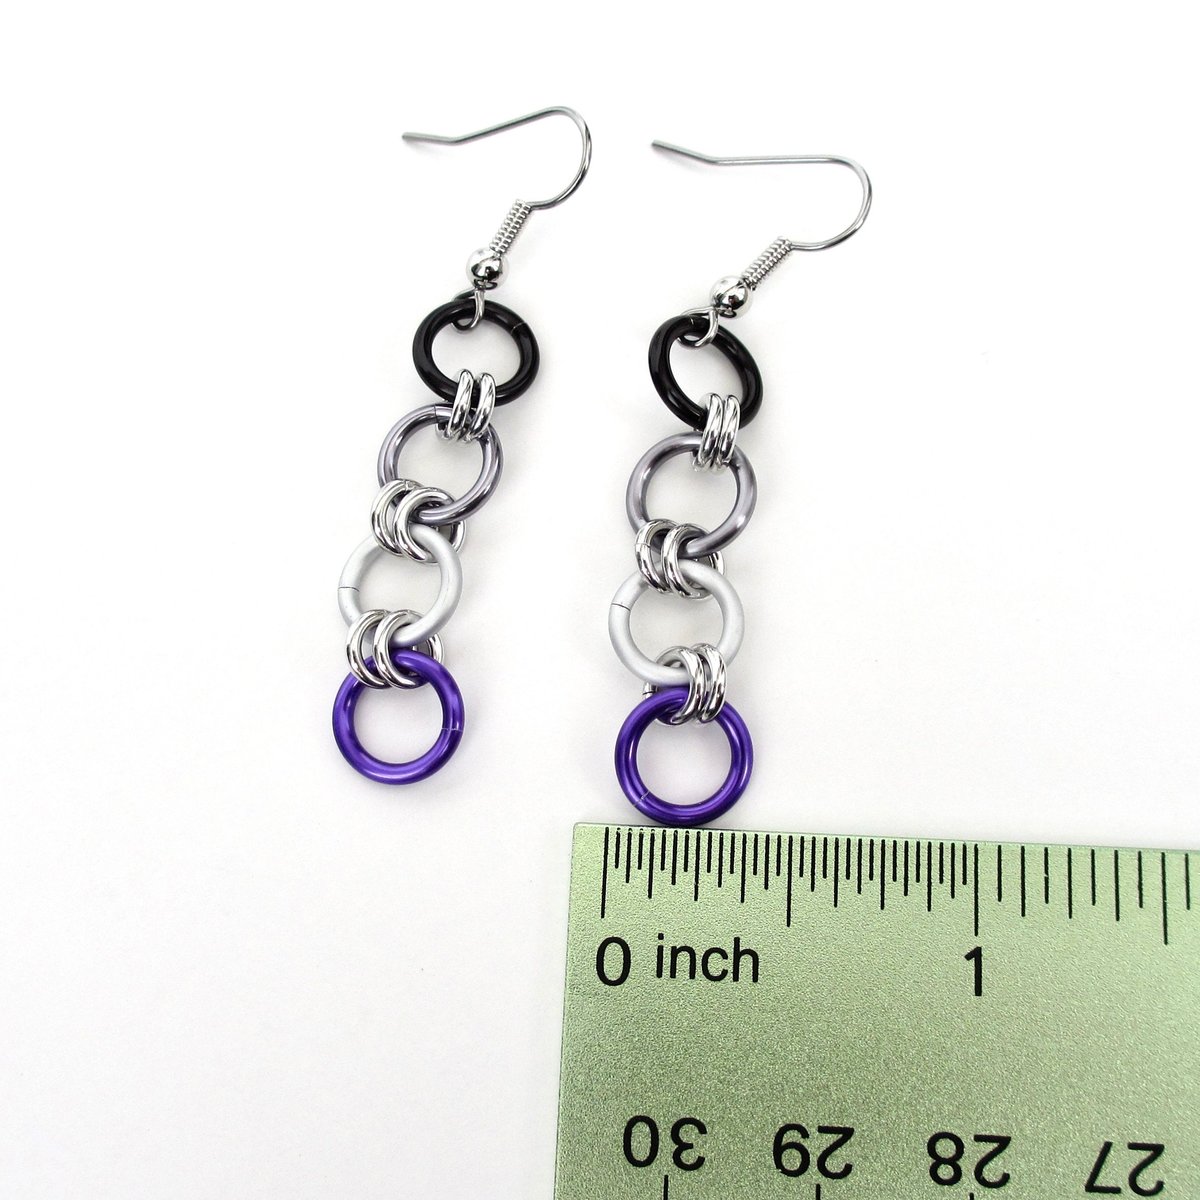 Asexual pride flag earrings, simple chain LGBTQ chainmail jewelry